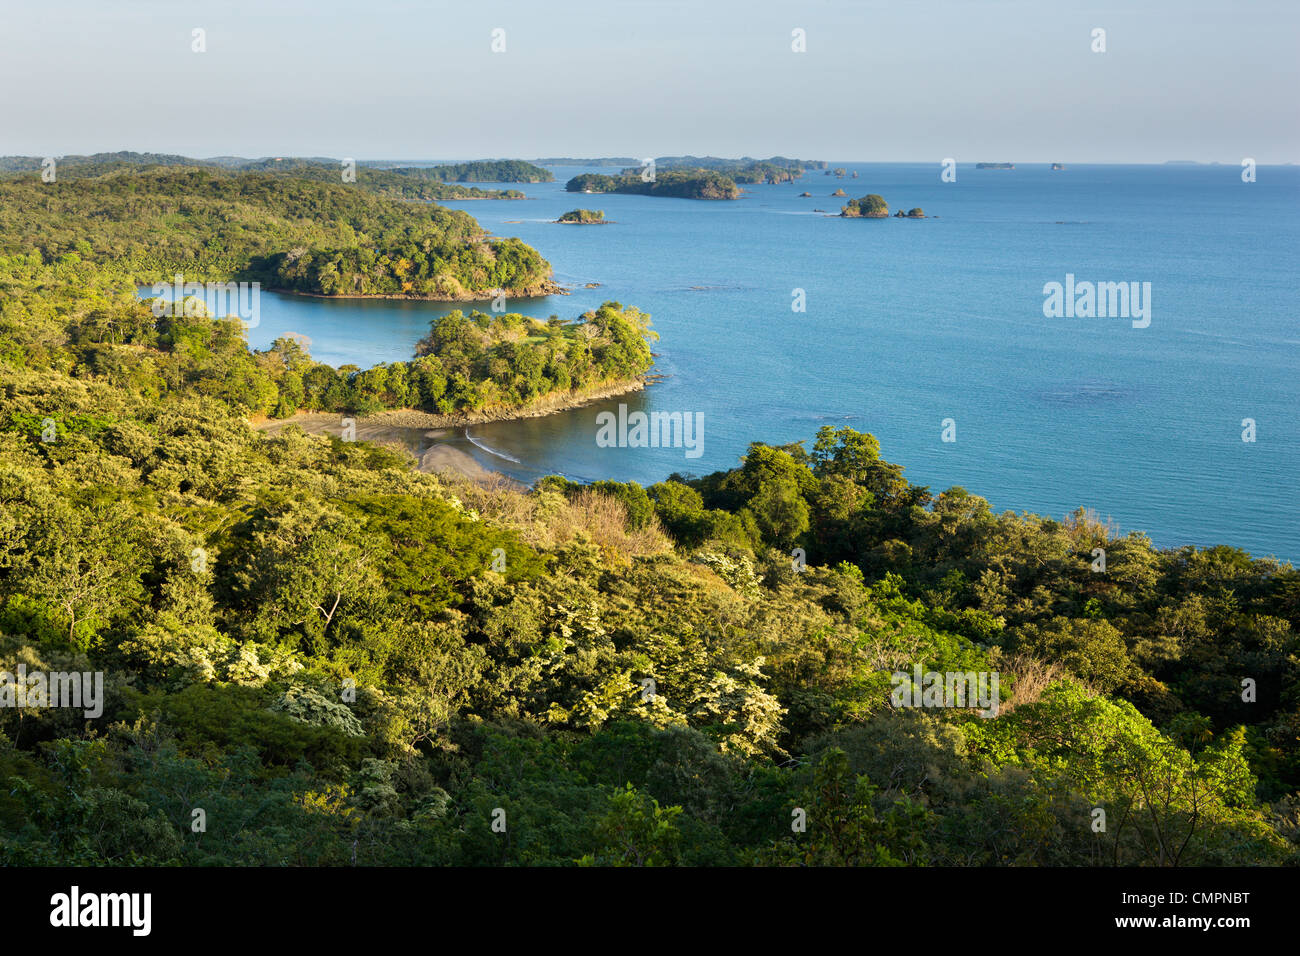 Thick vegetation on Boca Chica island in the Chiriqui Marine National Park, Panama, Central America Stock Photo